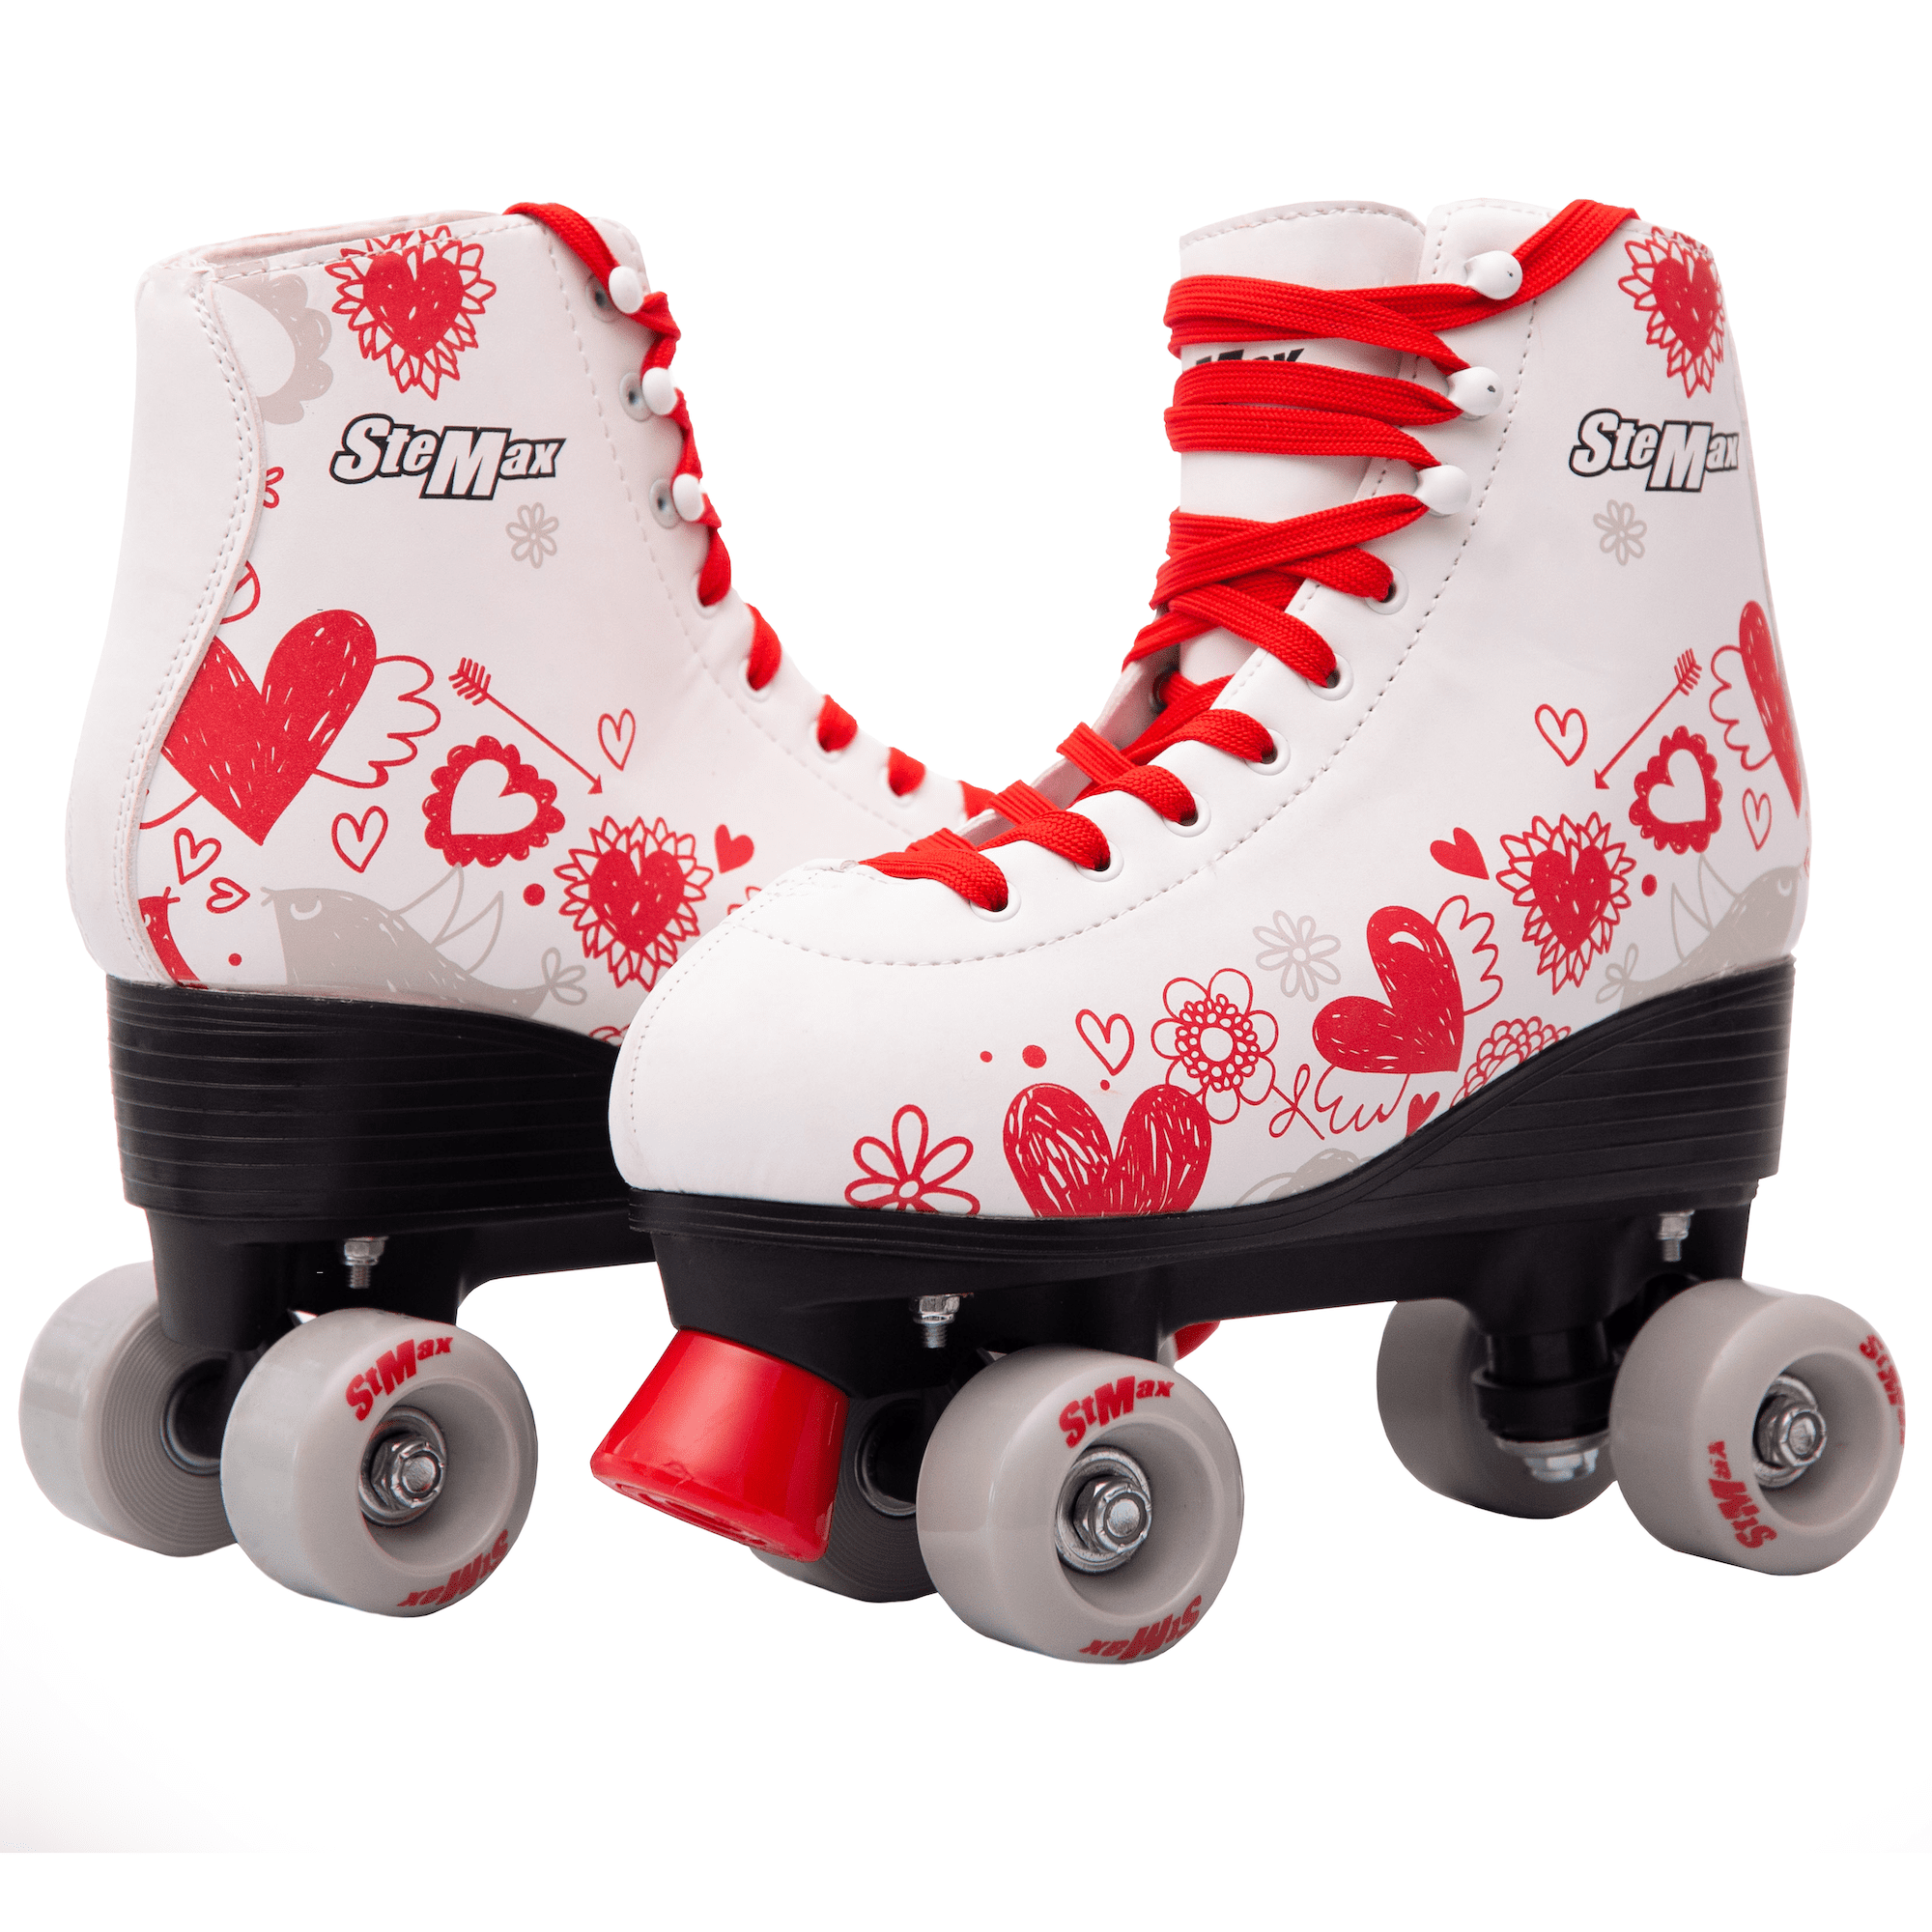 Quad Roller Skates for Girls and Women Size 4 Adult White and pink Heart Derby 